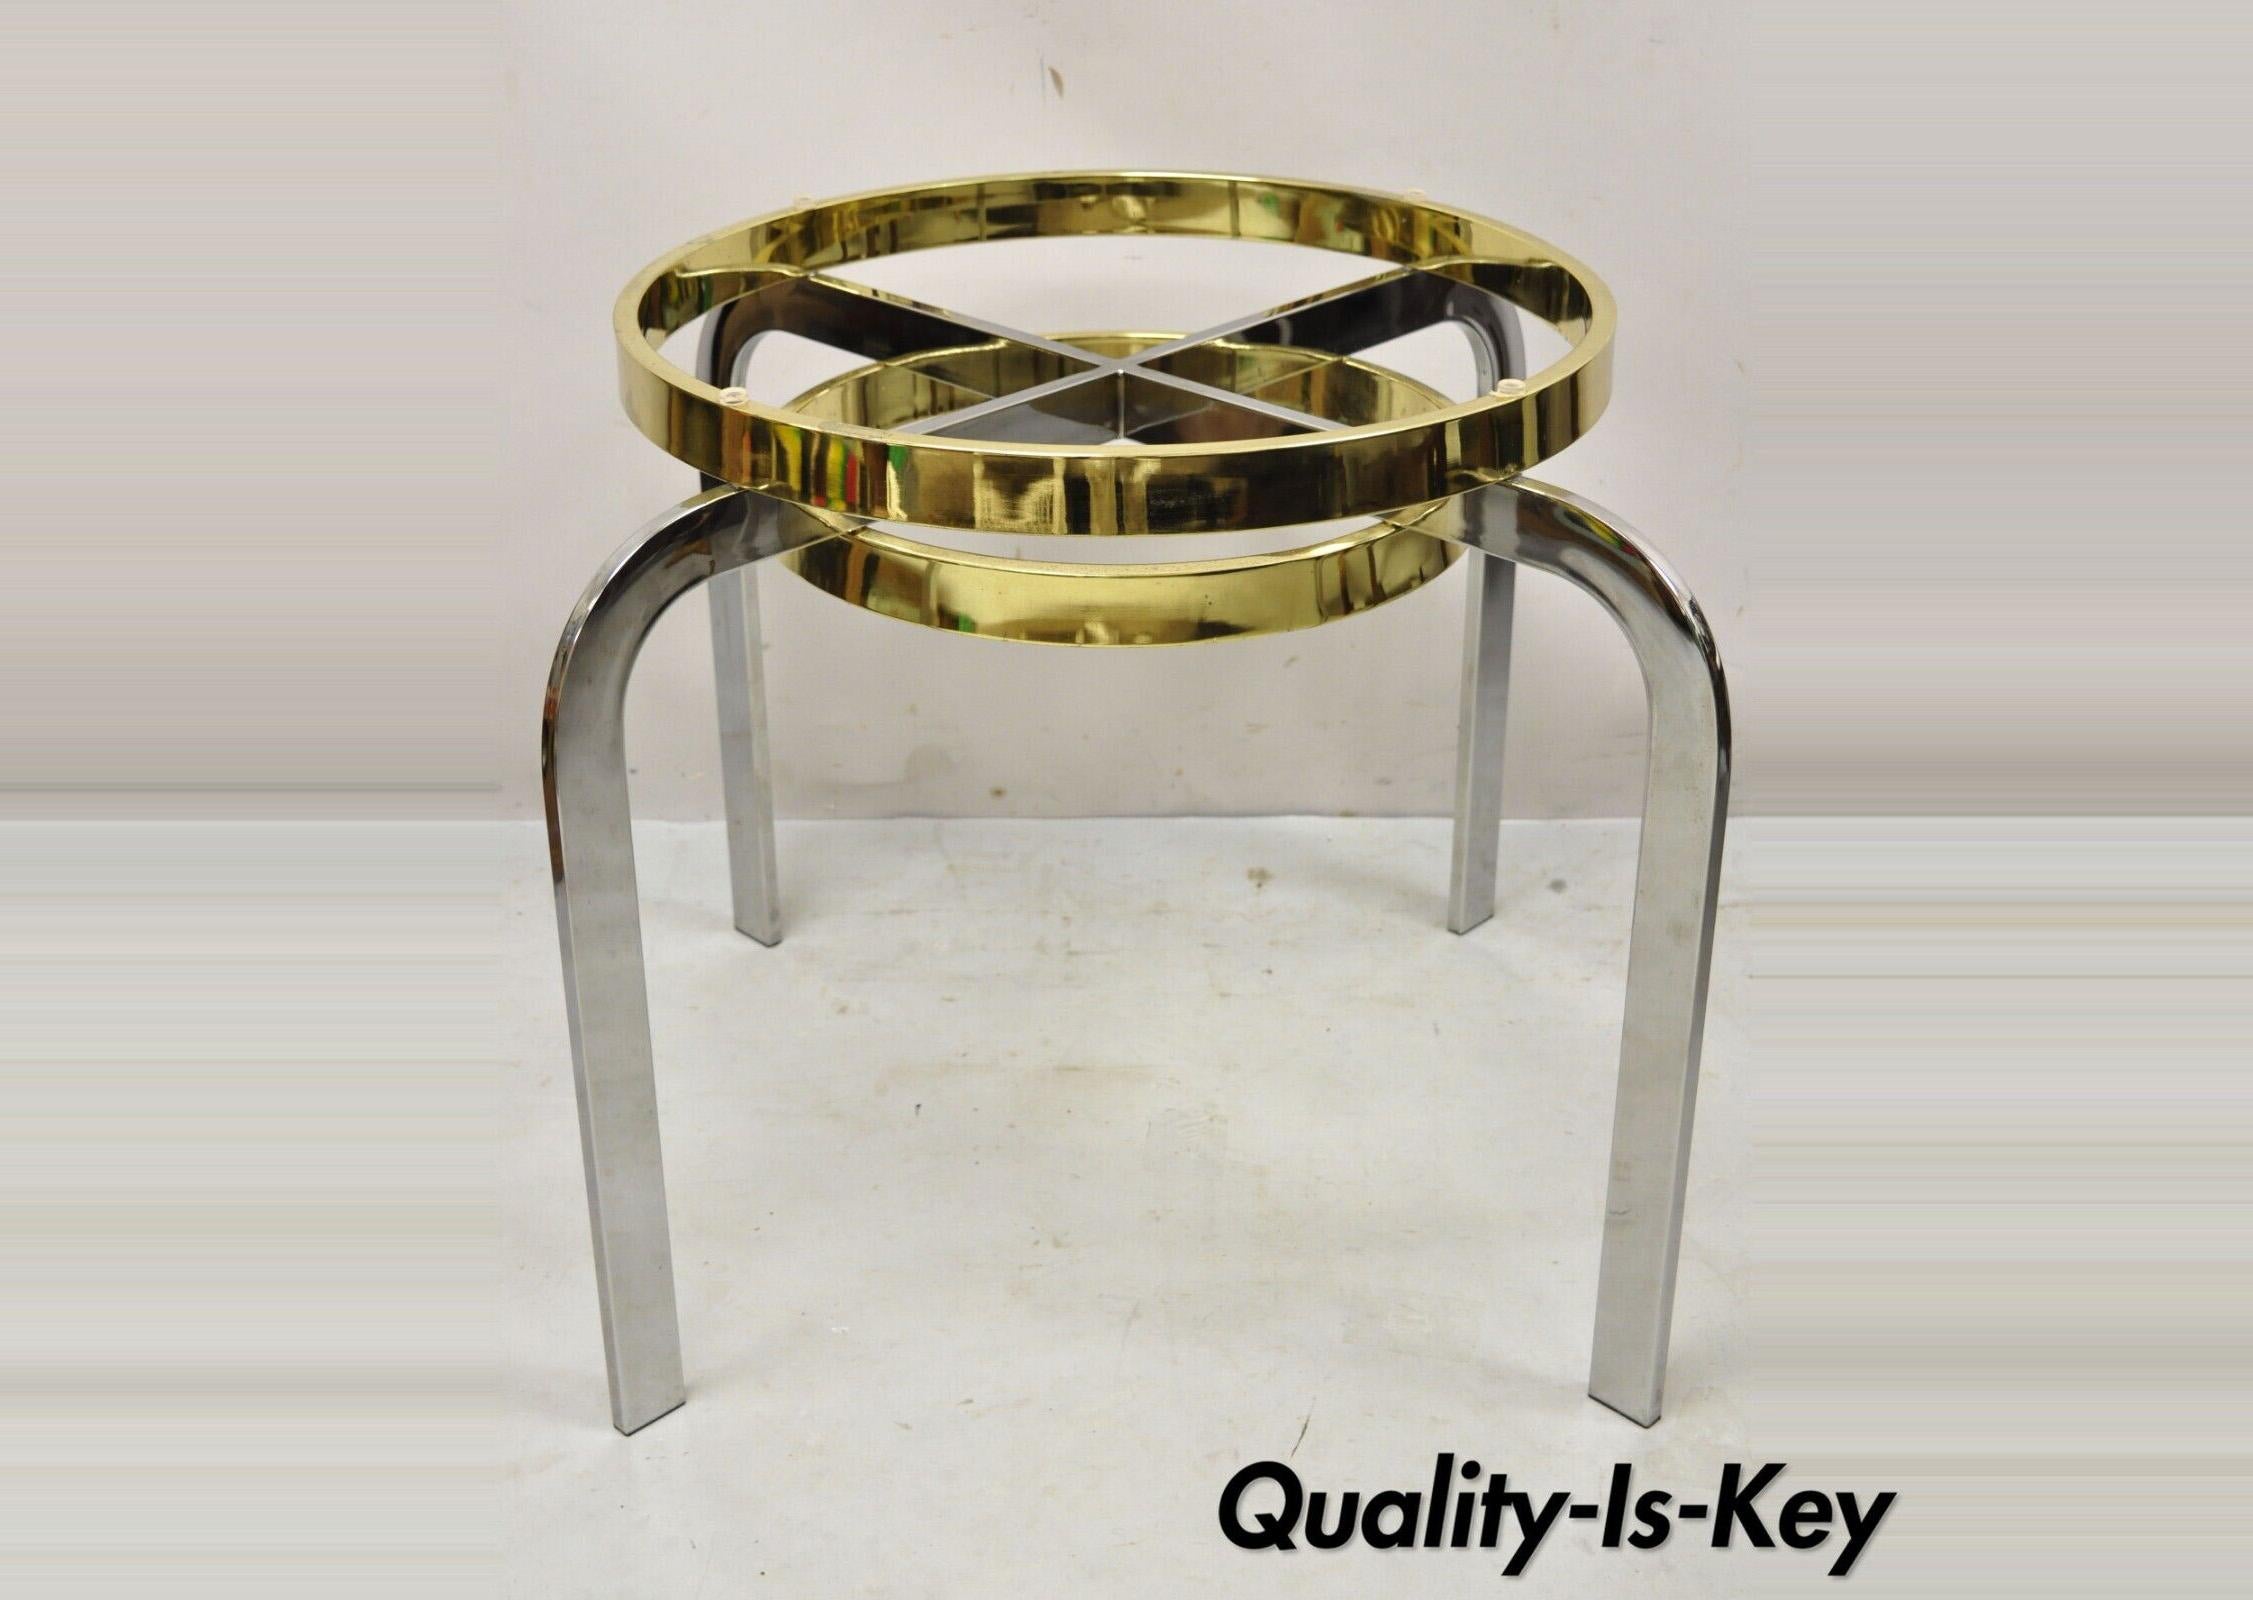 Vintage Mid-Century Modern Milo Baughman style chrome brass round side table. Item features a chrome and brass plated metal frame, clean modernist lines, great style and form, no glass top, possibly by Design Institute of America. Circa 1970s.